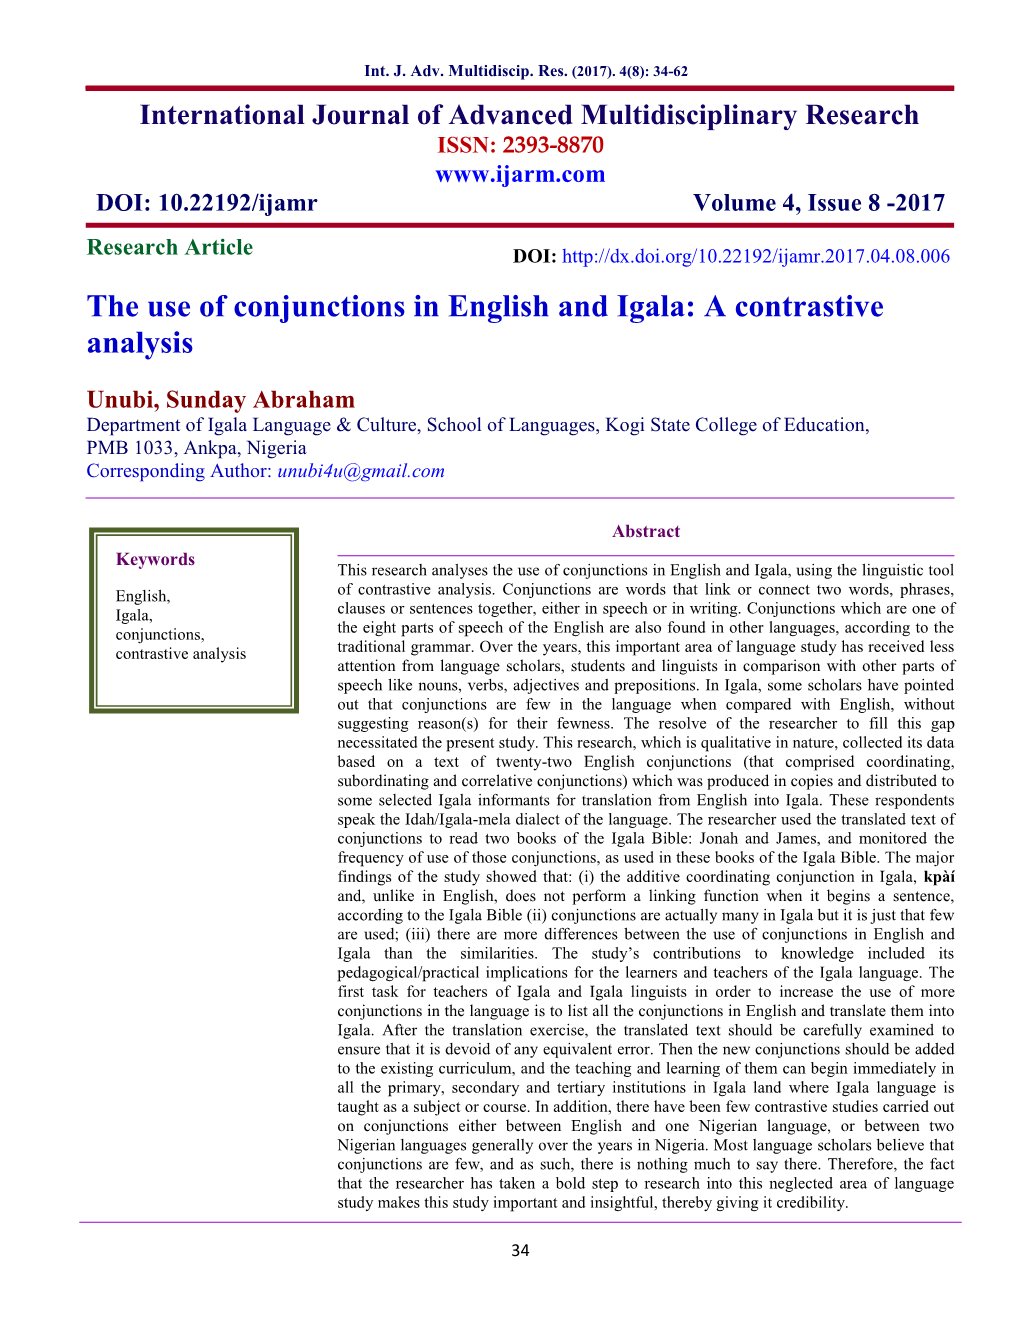 The Use of Conjunctions in English and Igala: a Contrastive Analysis